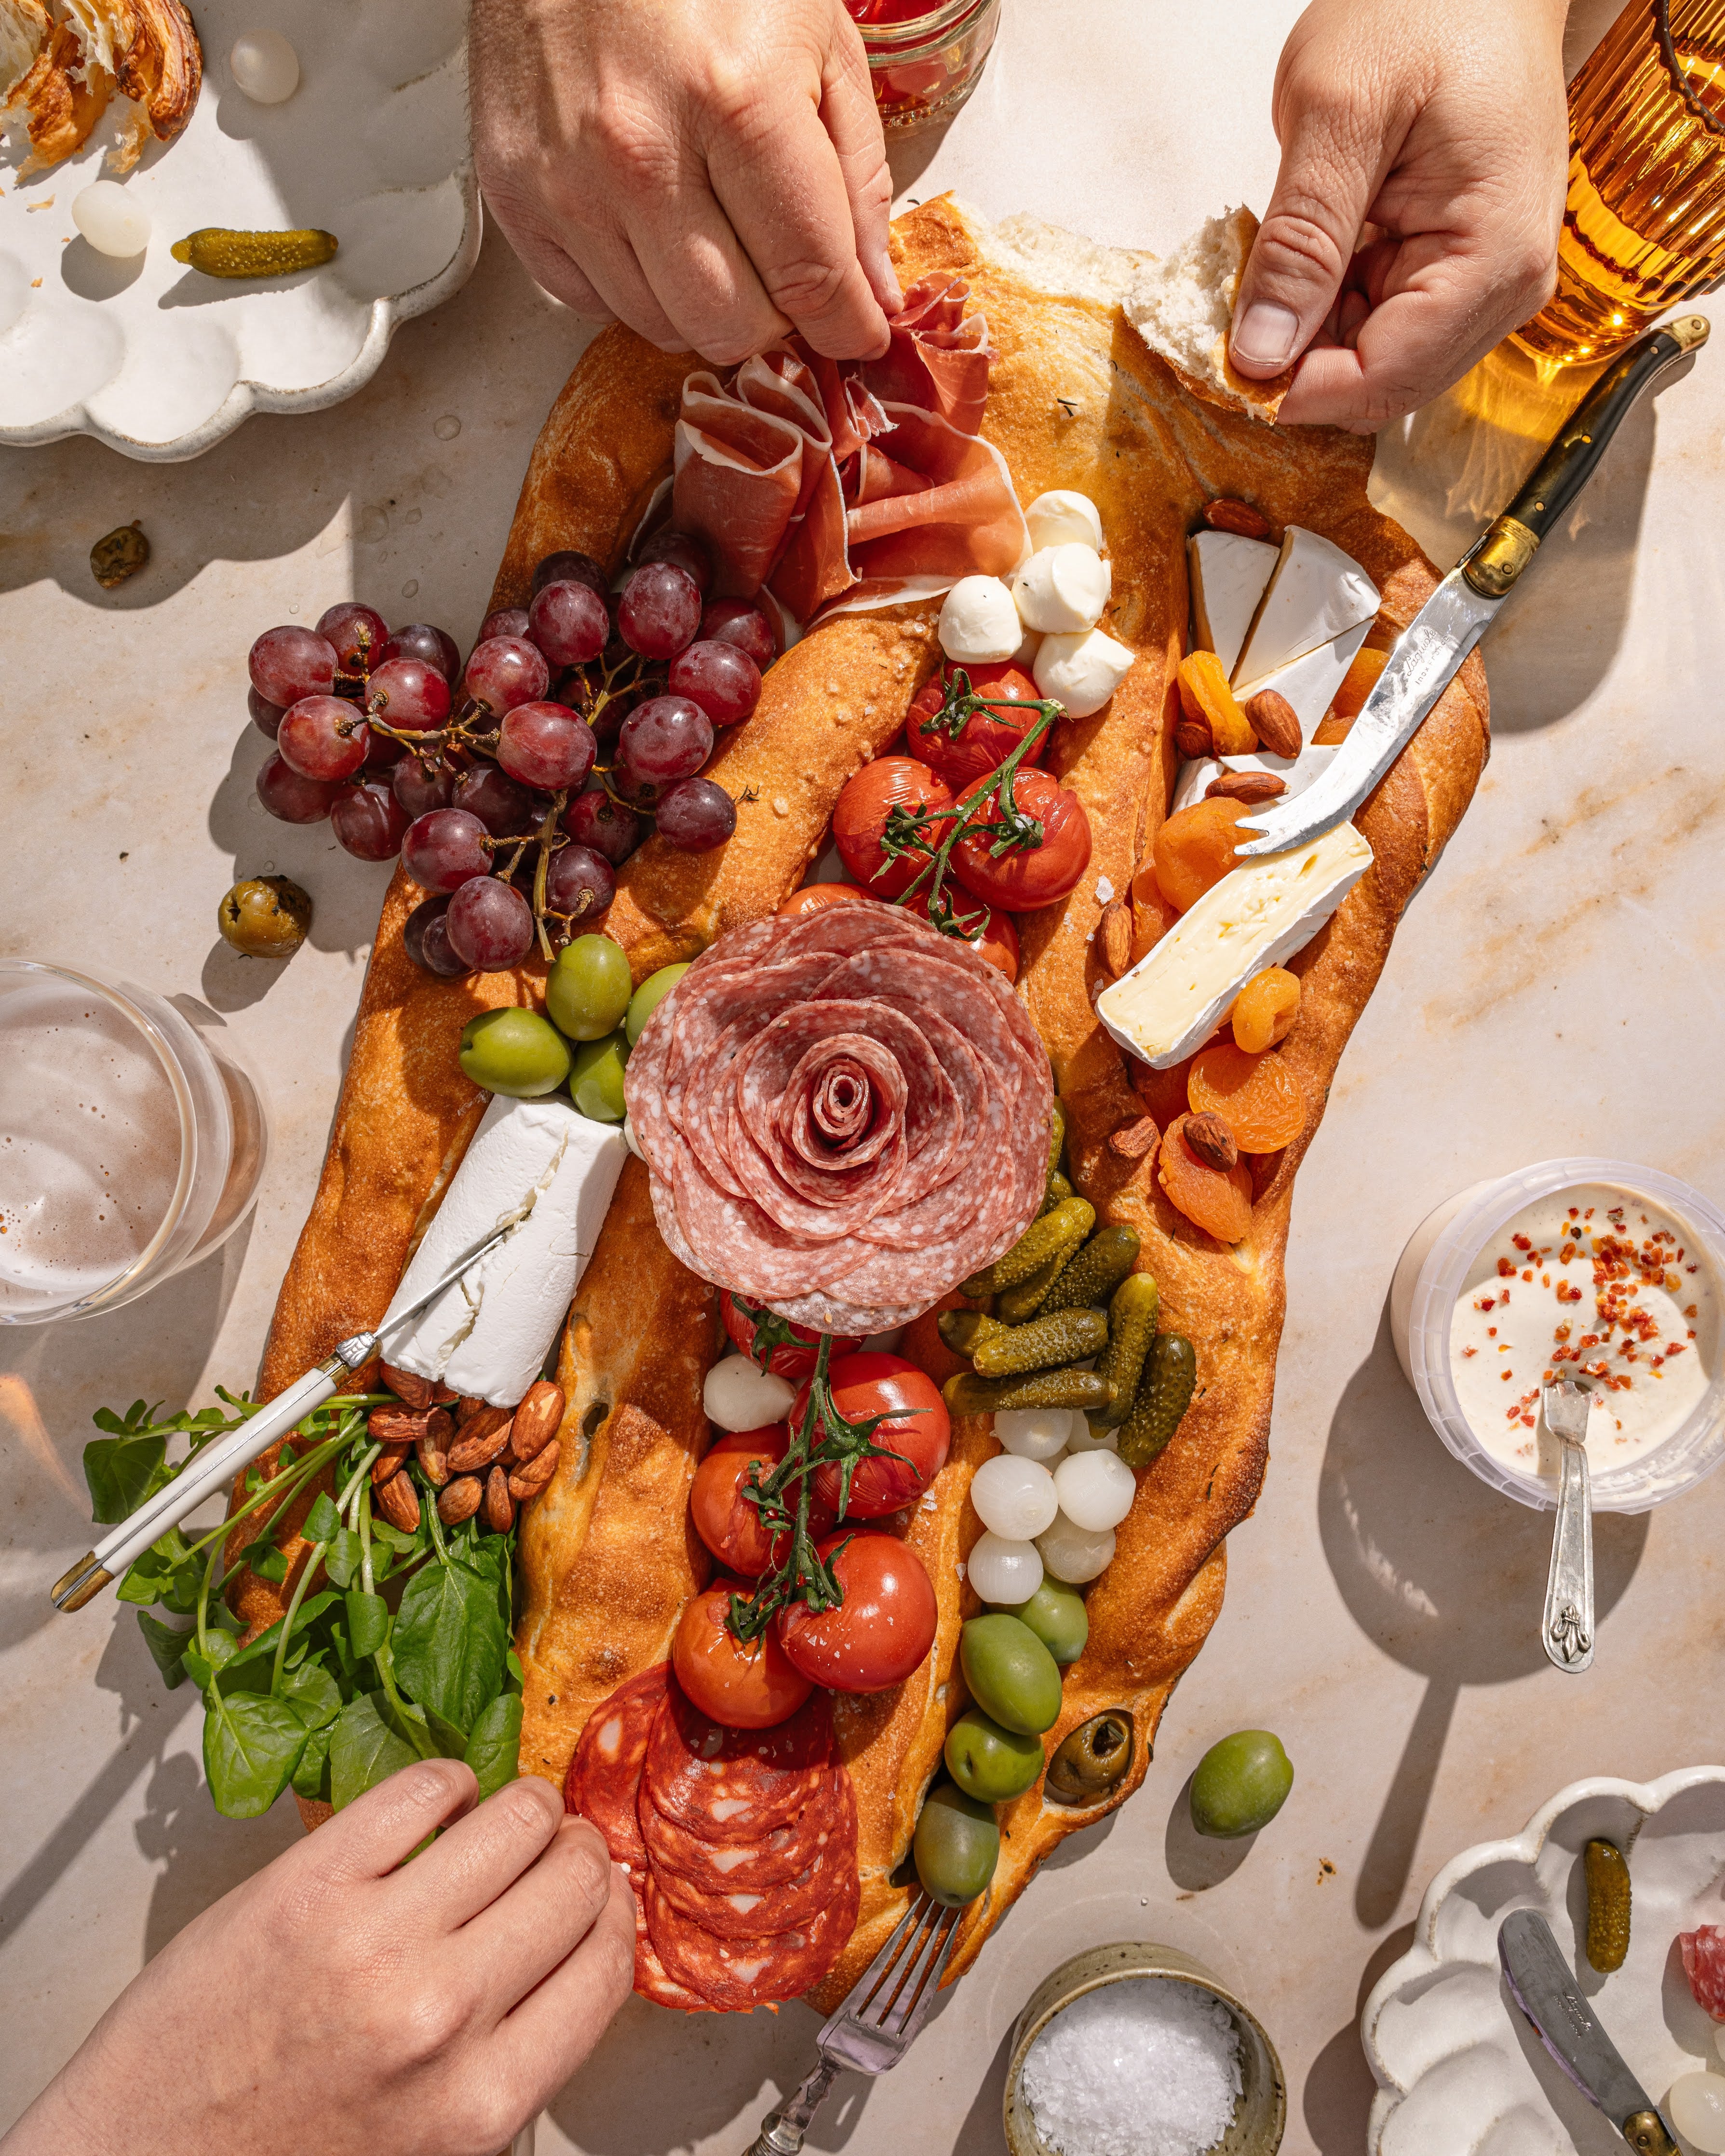 A fougasse hosting platter with salami, olives, tomatoes, cheese and grapes, being pulled apart by two sets of hands